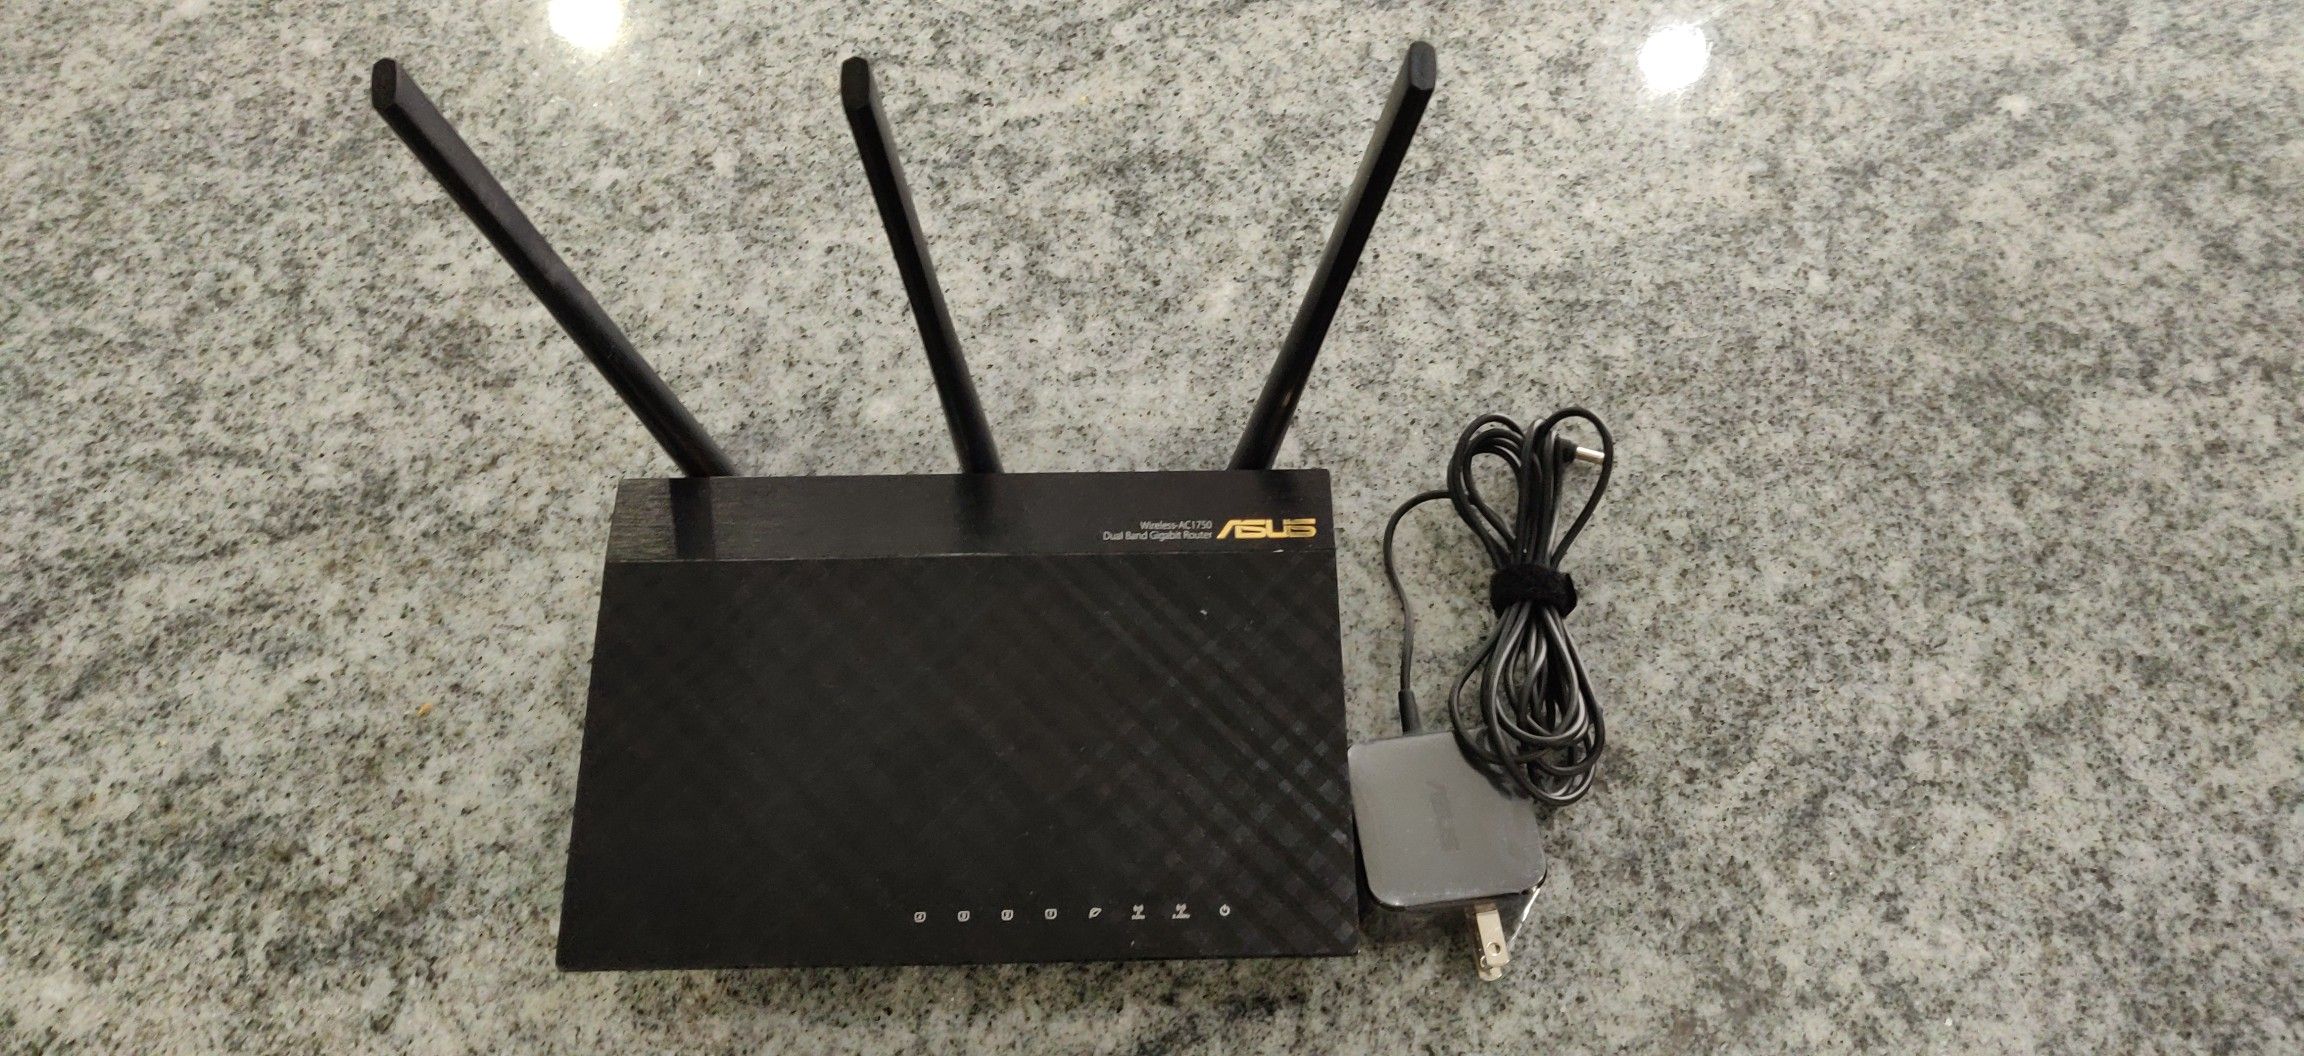 Asus Router AC1750